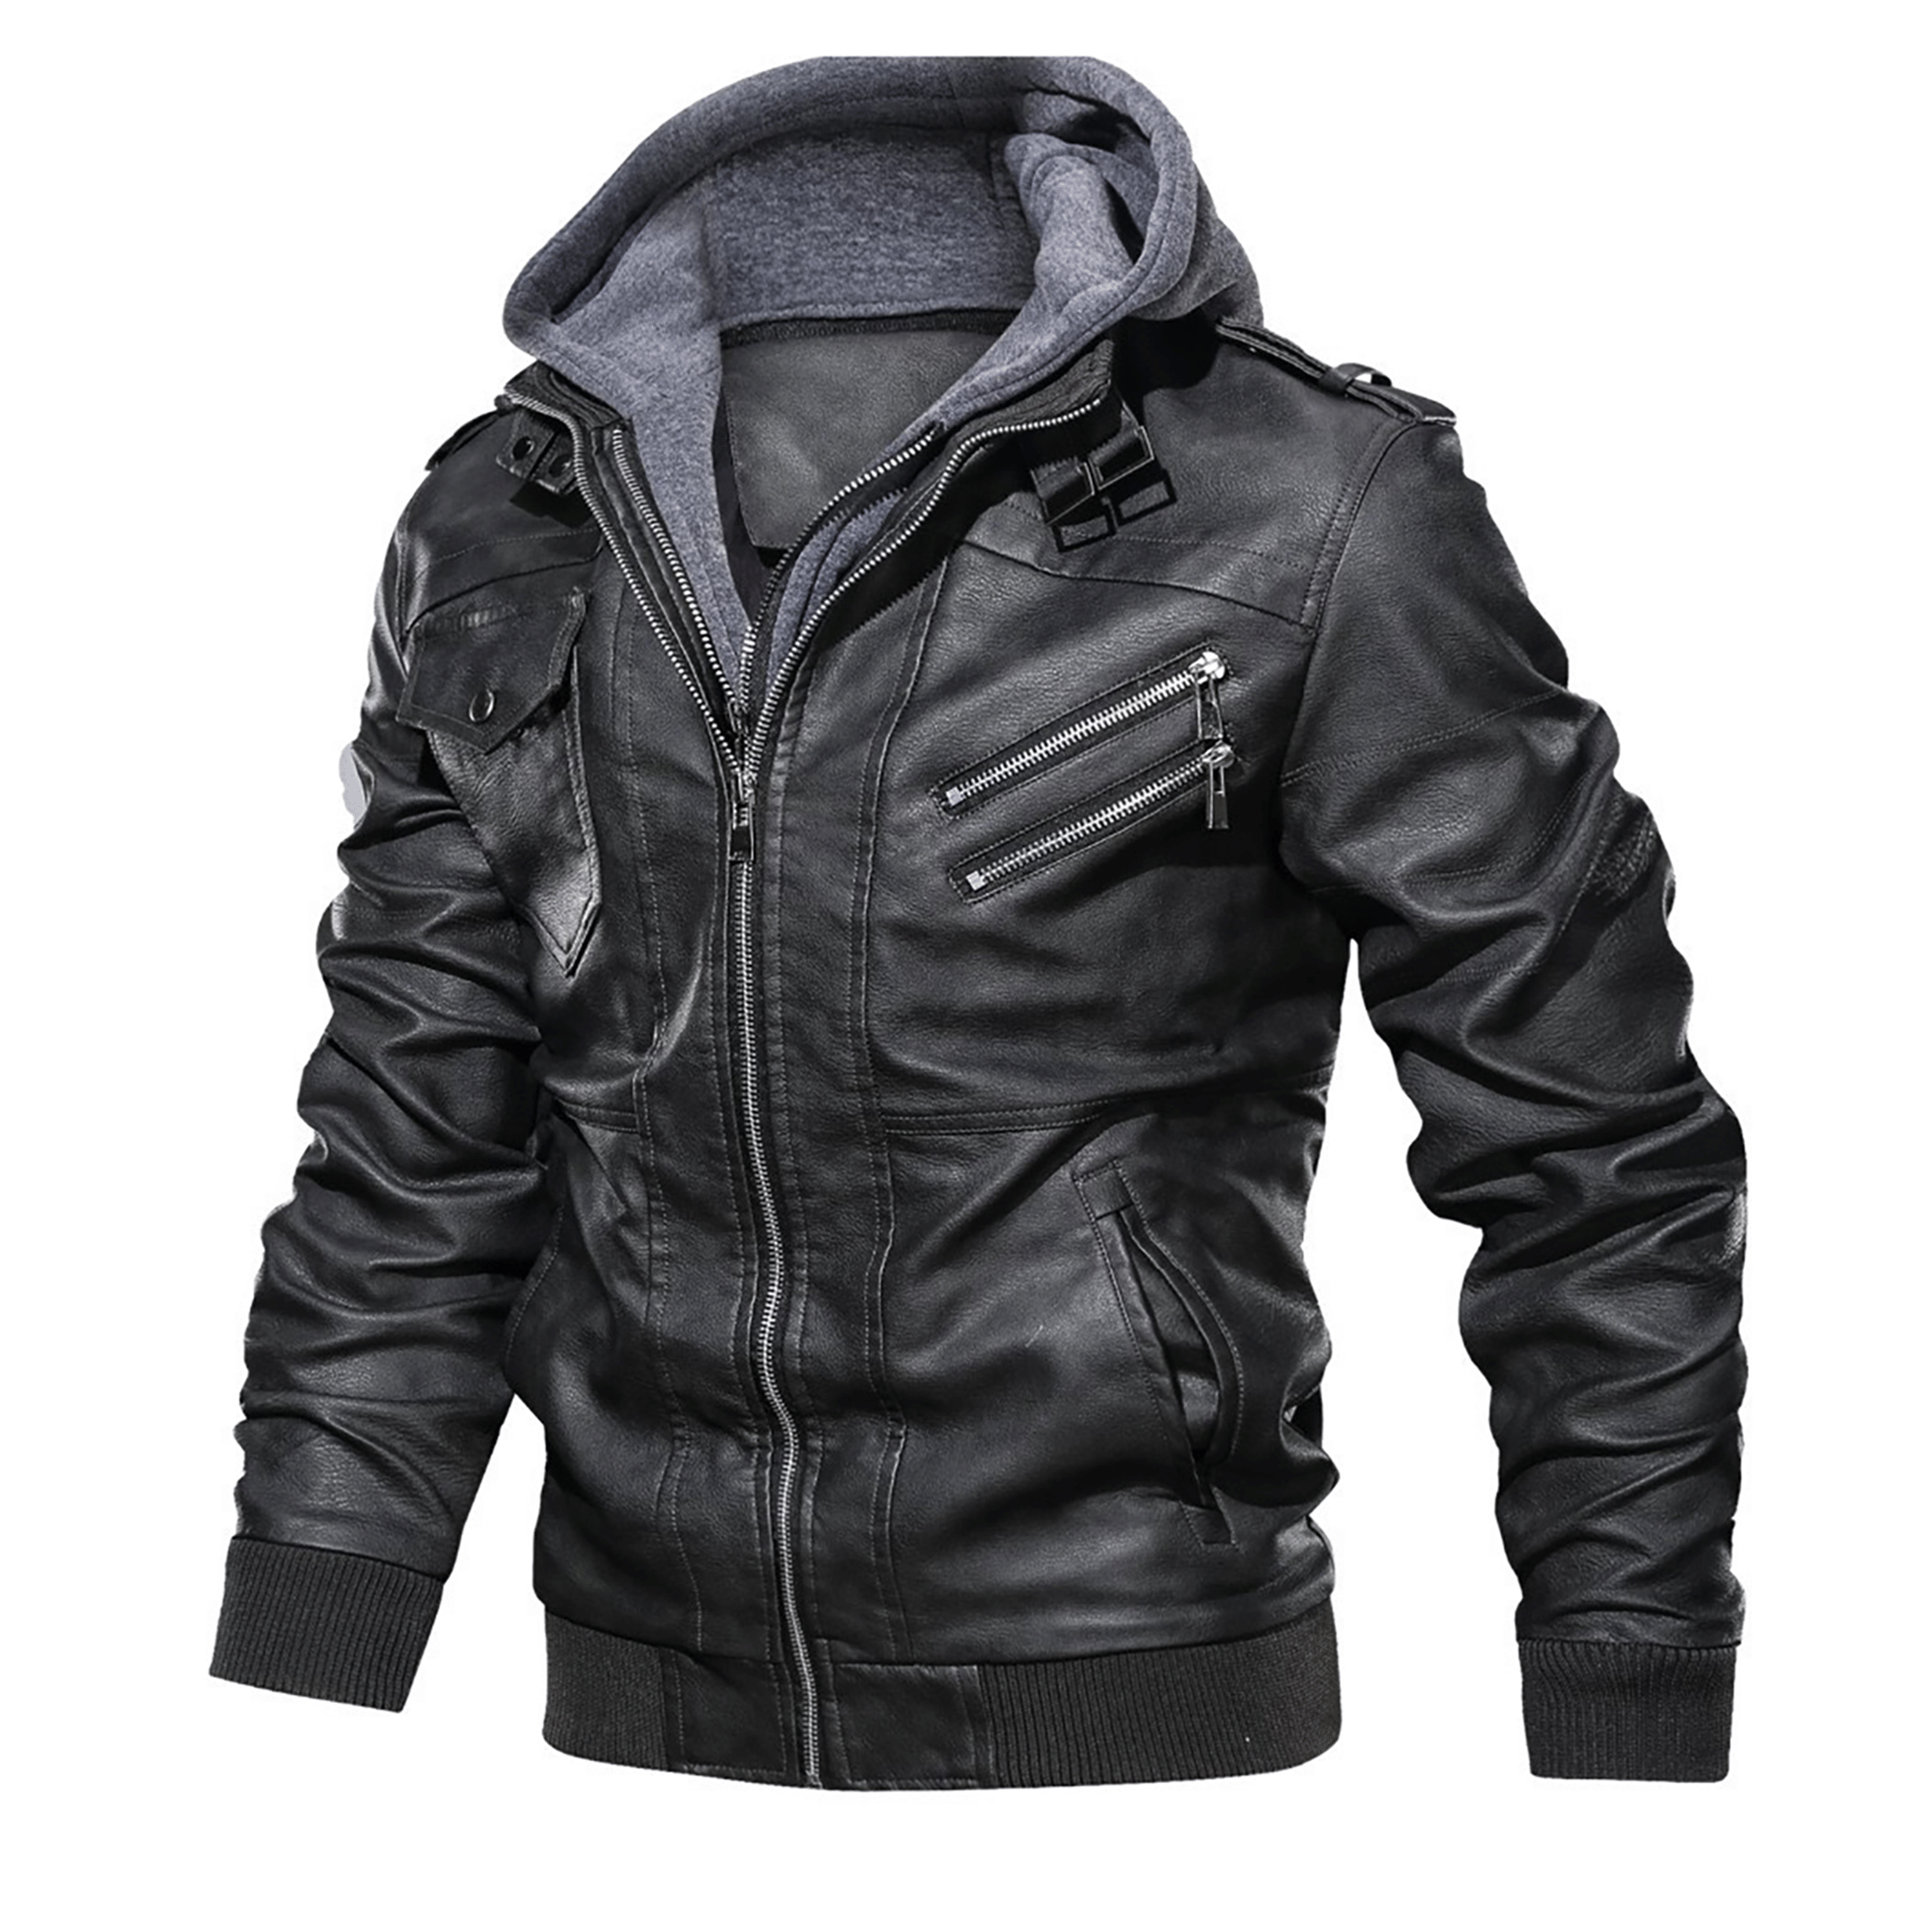 Top leather jackets and latest products 461